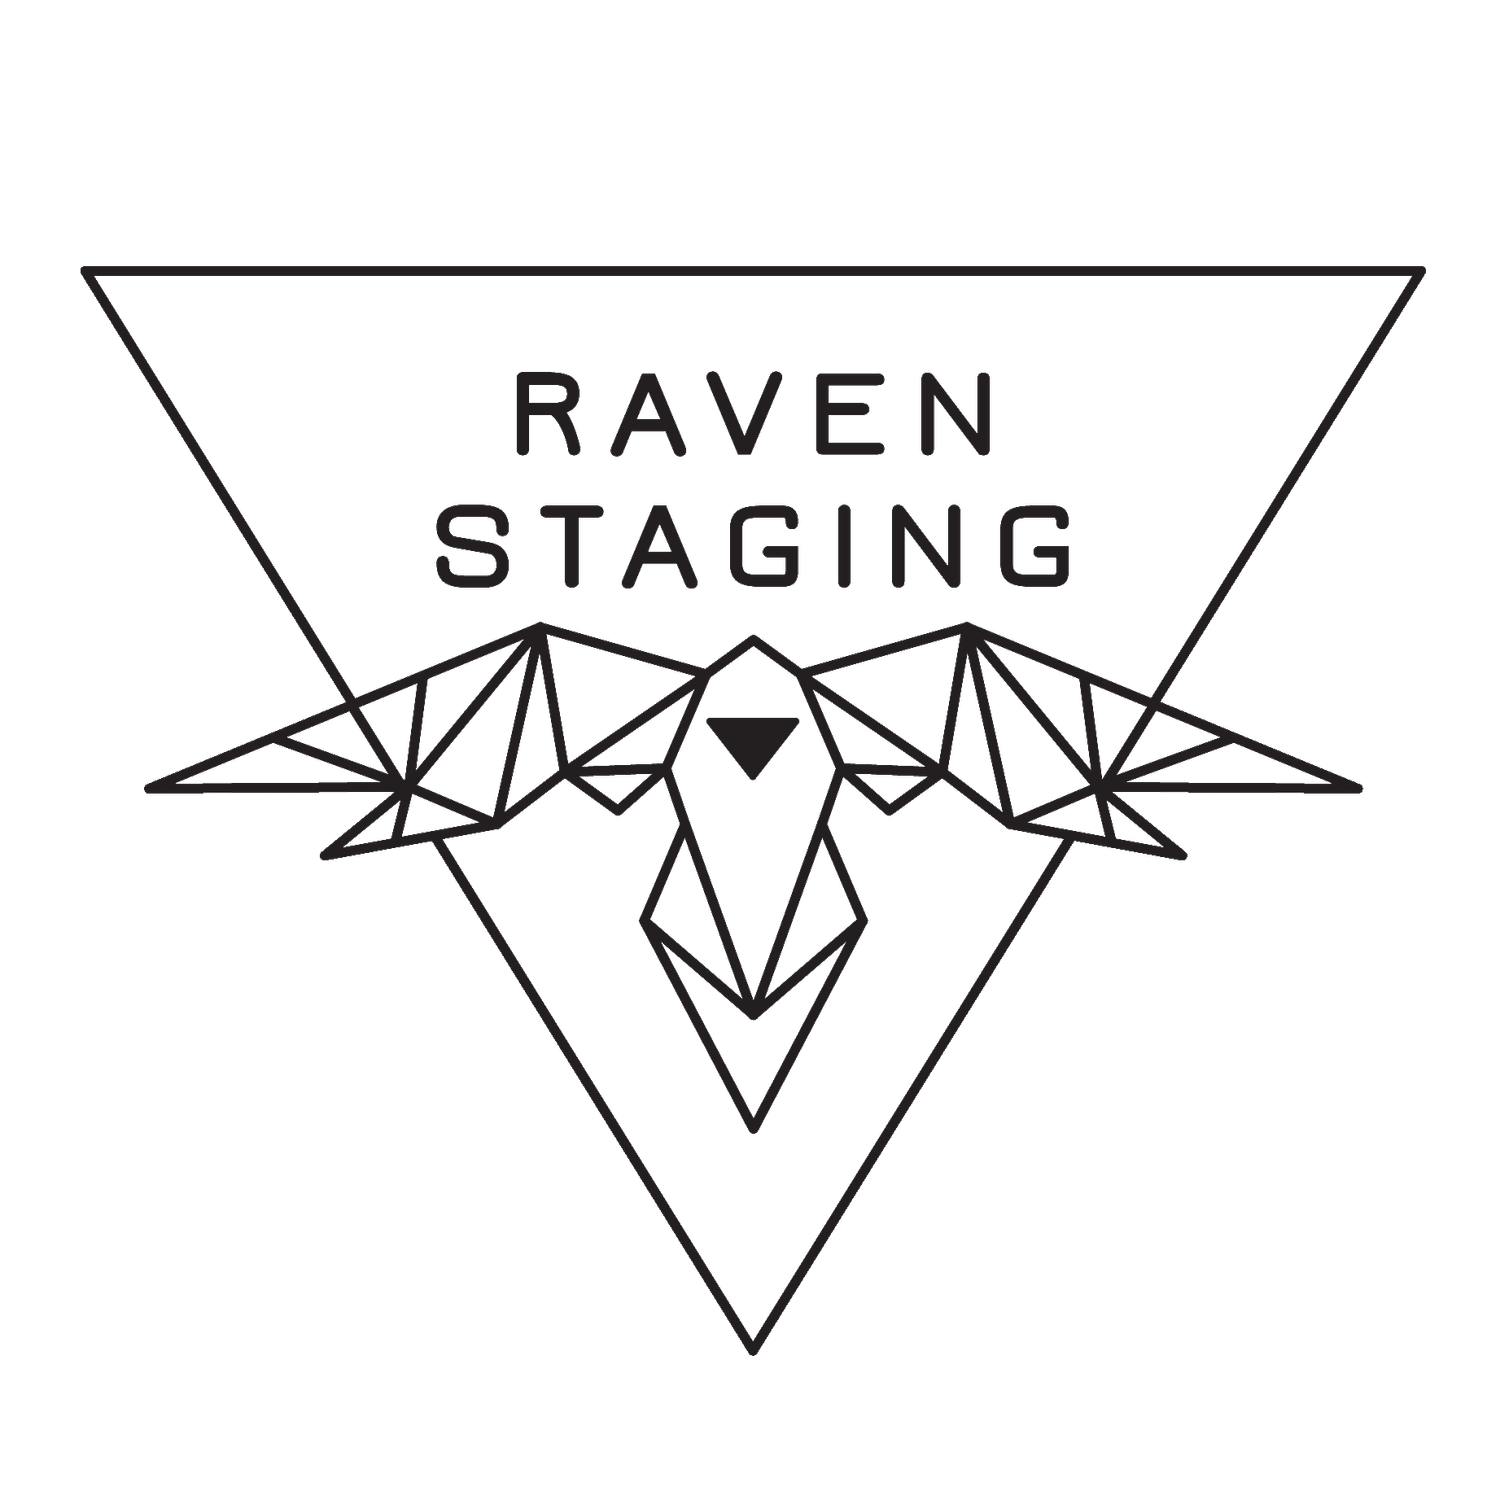 Raven Staging